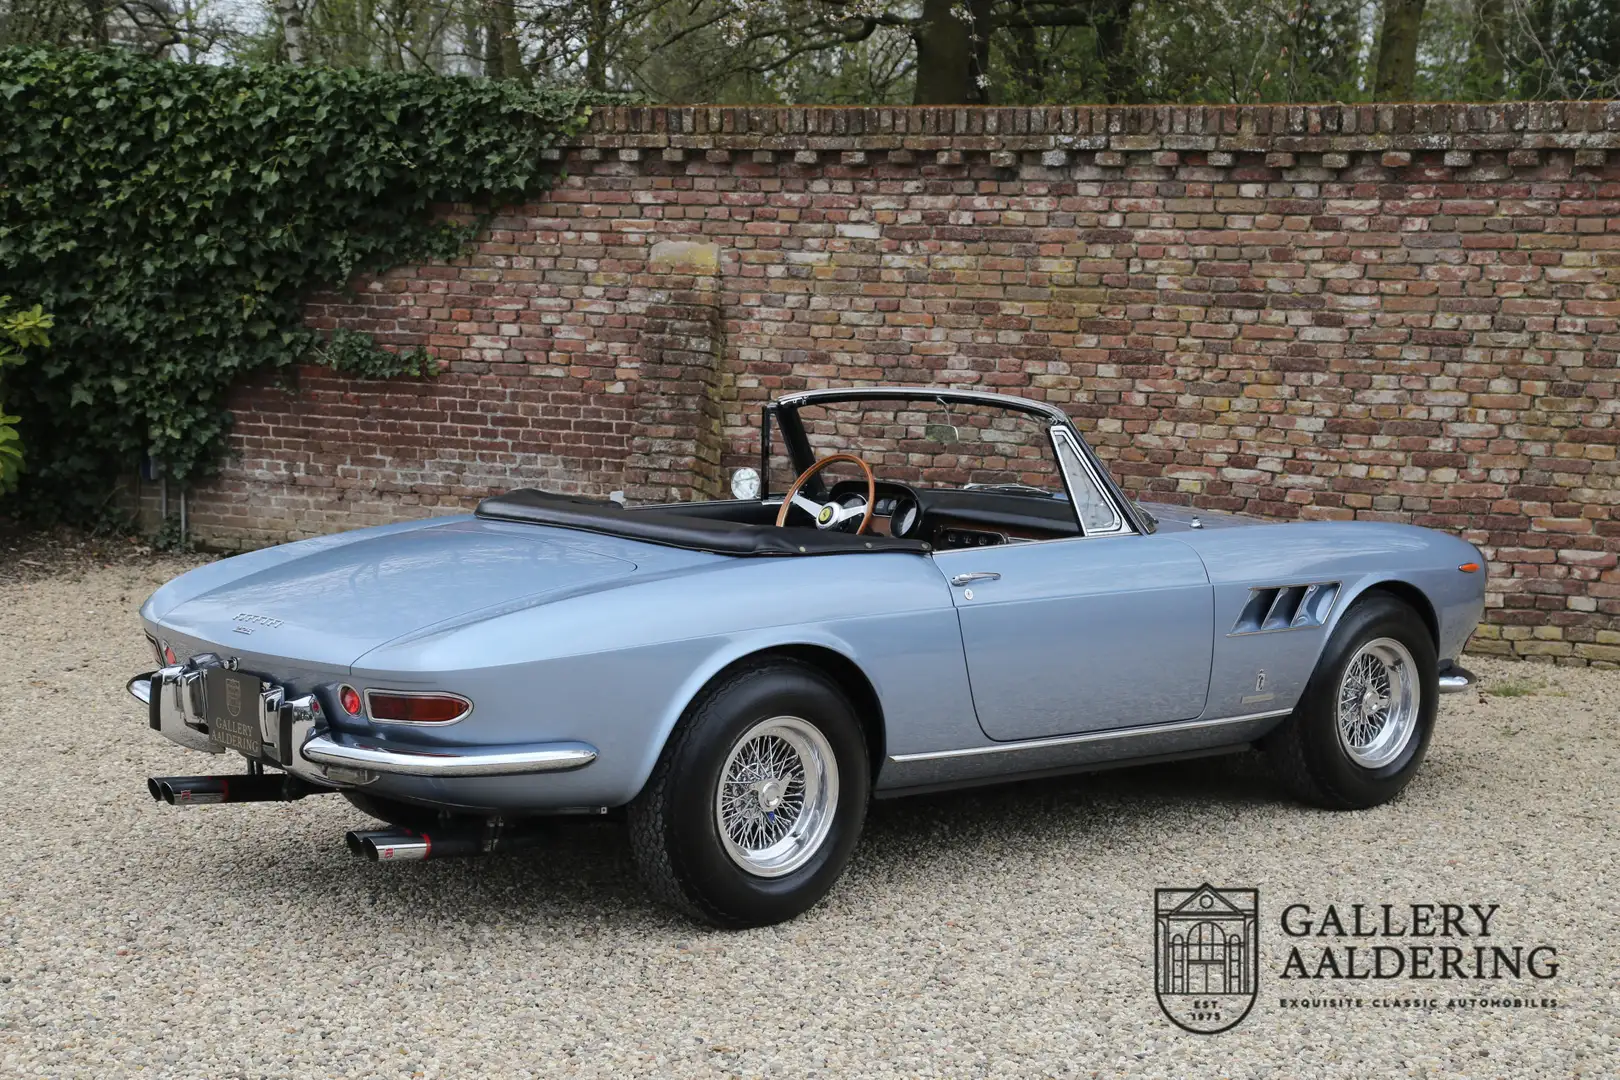 Ferrari 275 GTS 34000 Miles! Equipped with factory hard top, F plava - 2